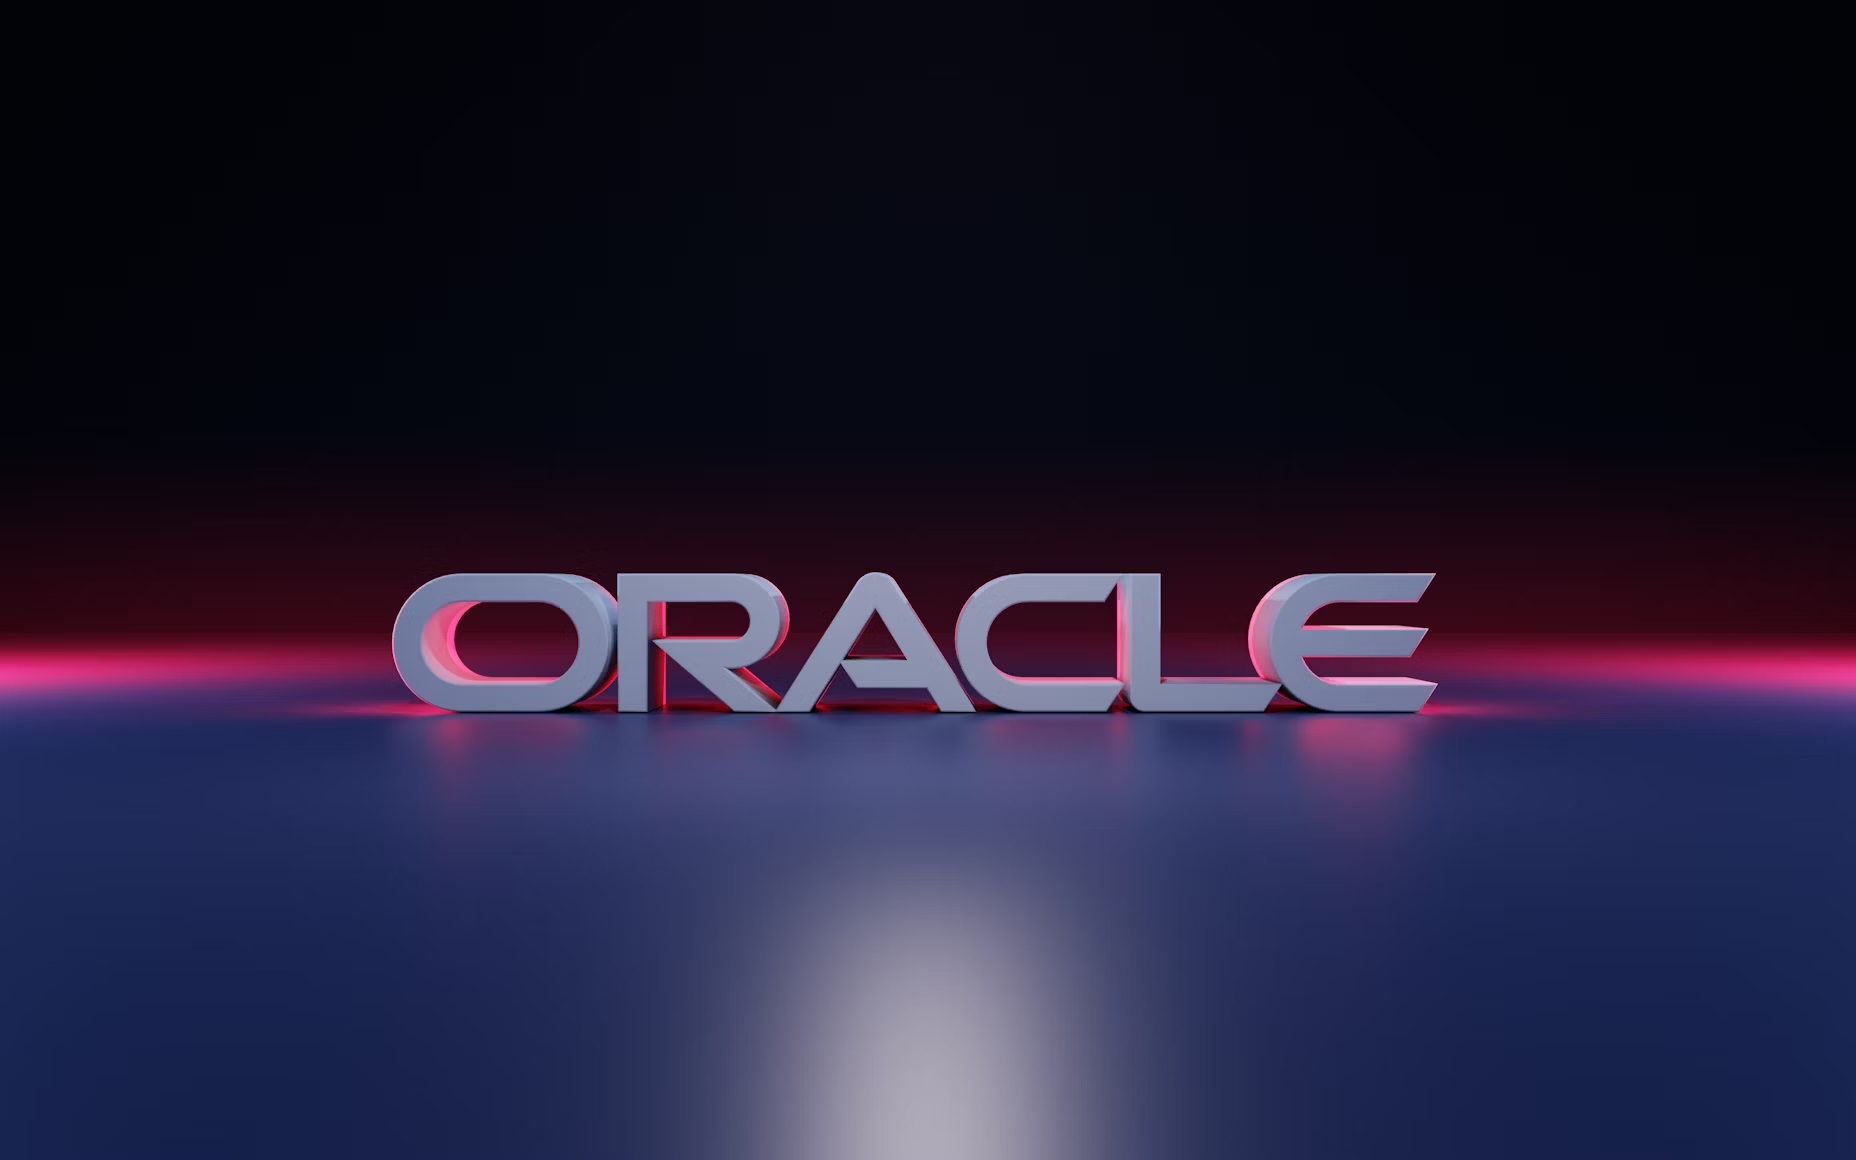 Oracle Corp. relocating its world headquarters from California’s Silicon Valley to Austin in 2020, is moving its global base to Nashville, according to Oracle Executive Chairman Larry Ellison.